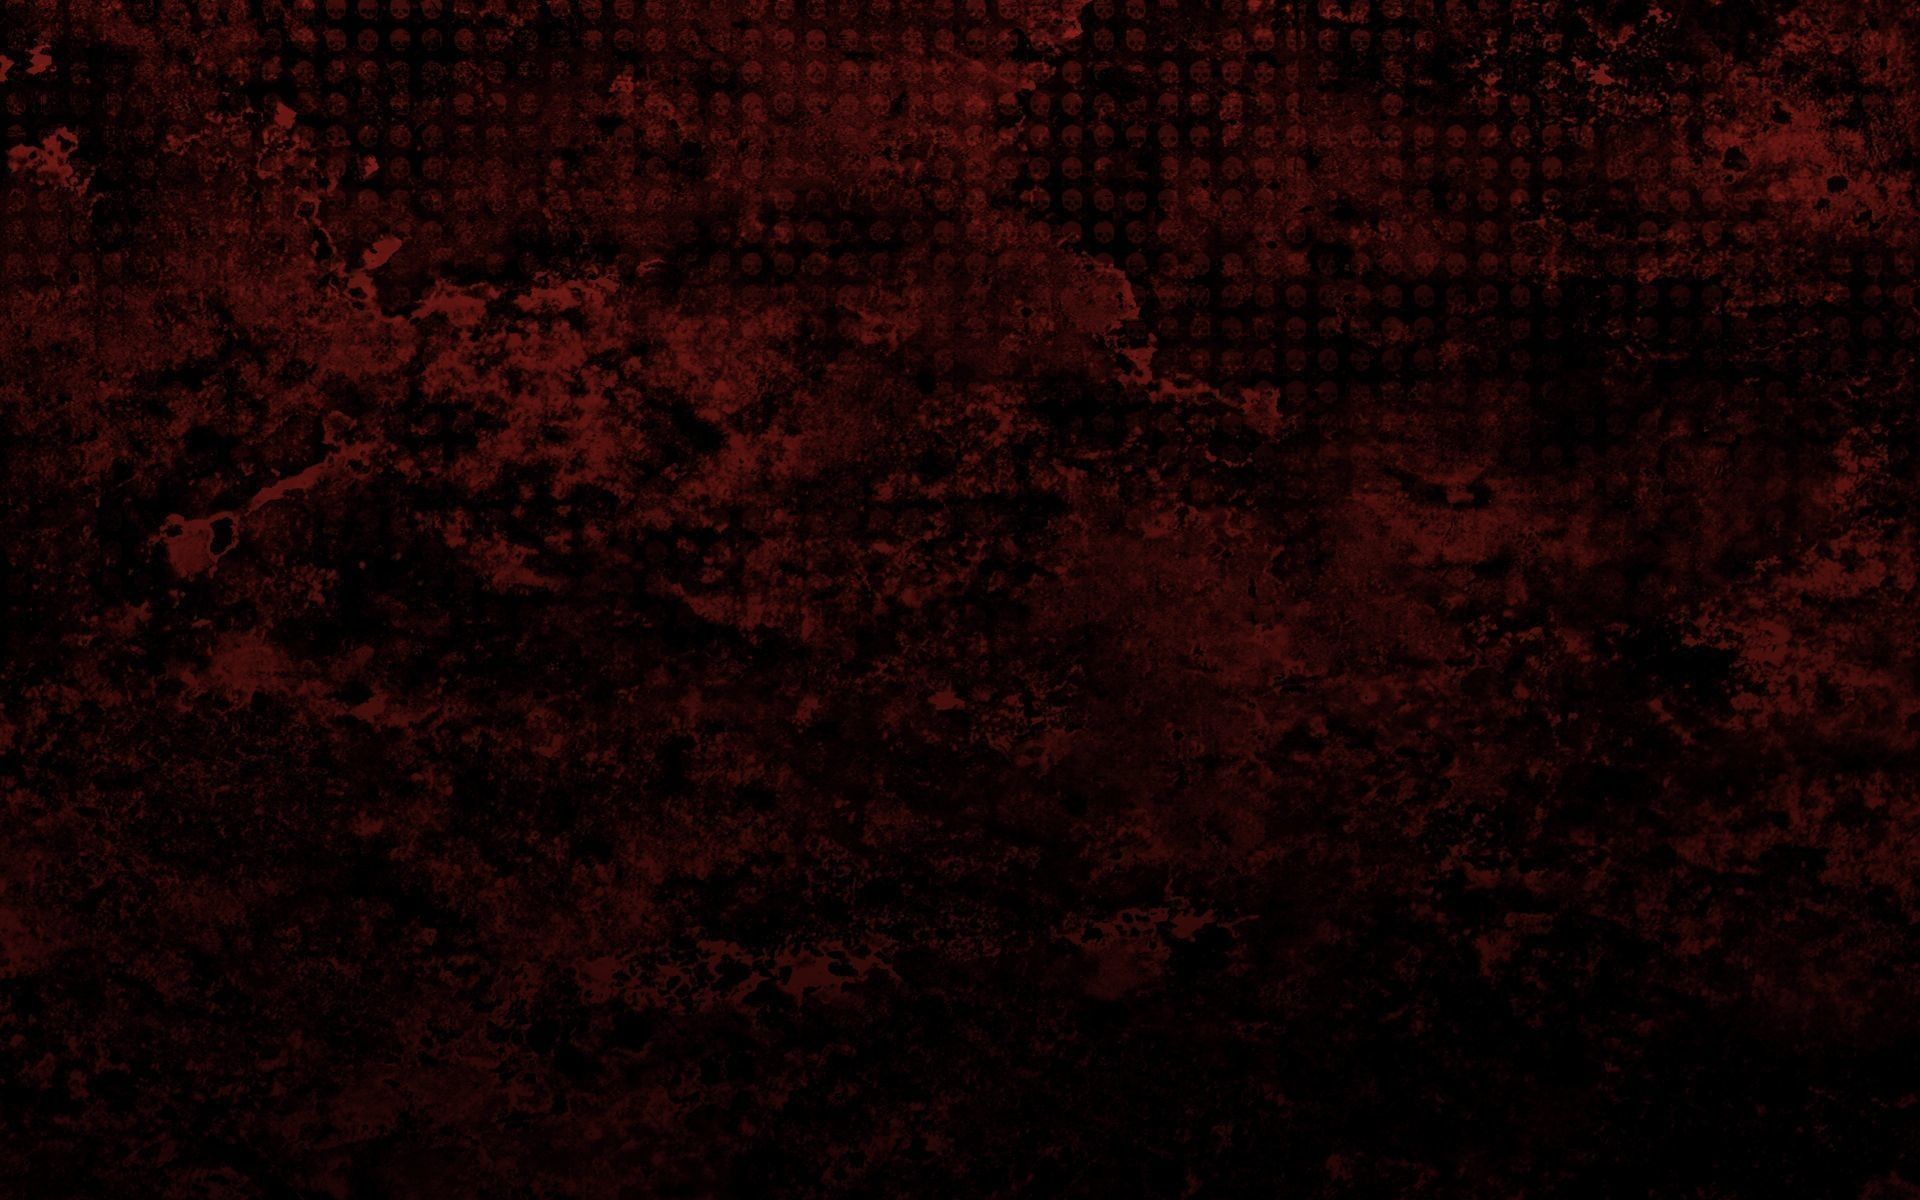 Red and black abstract wallpaper with a grunge texture - Dark red